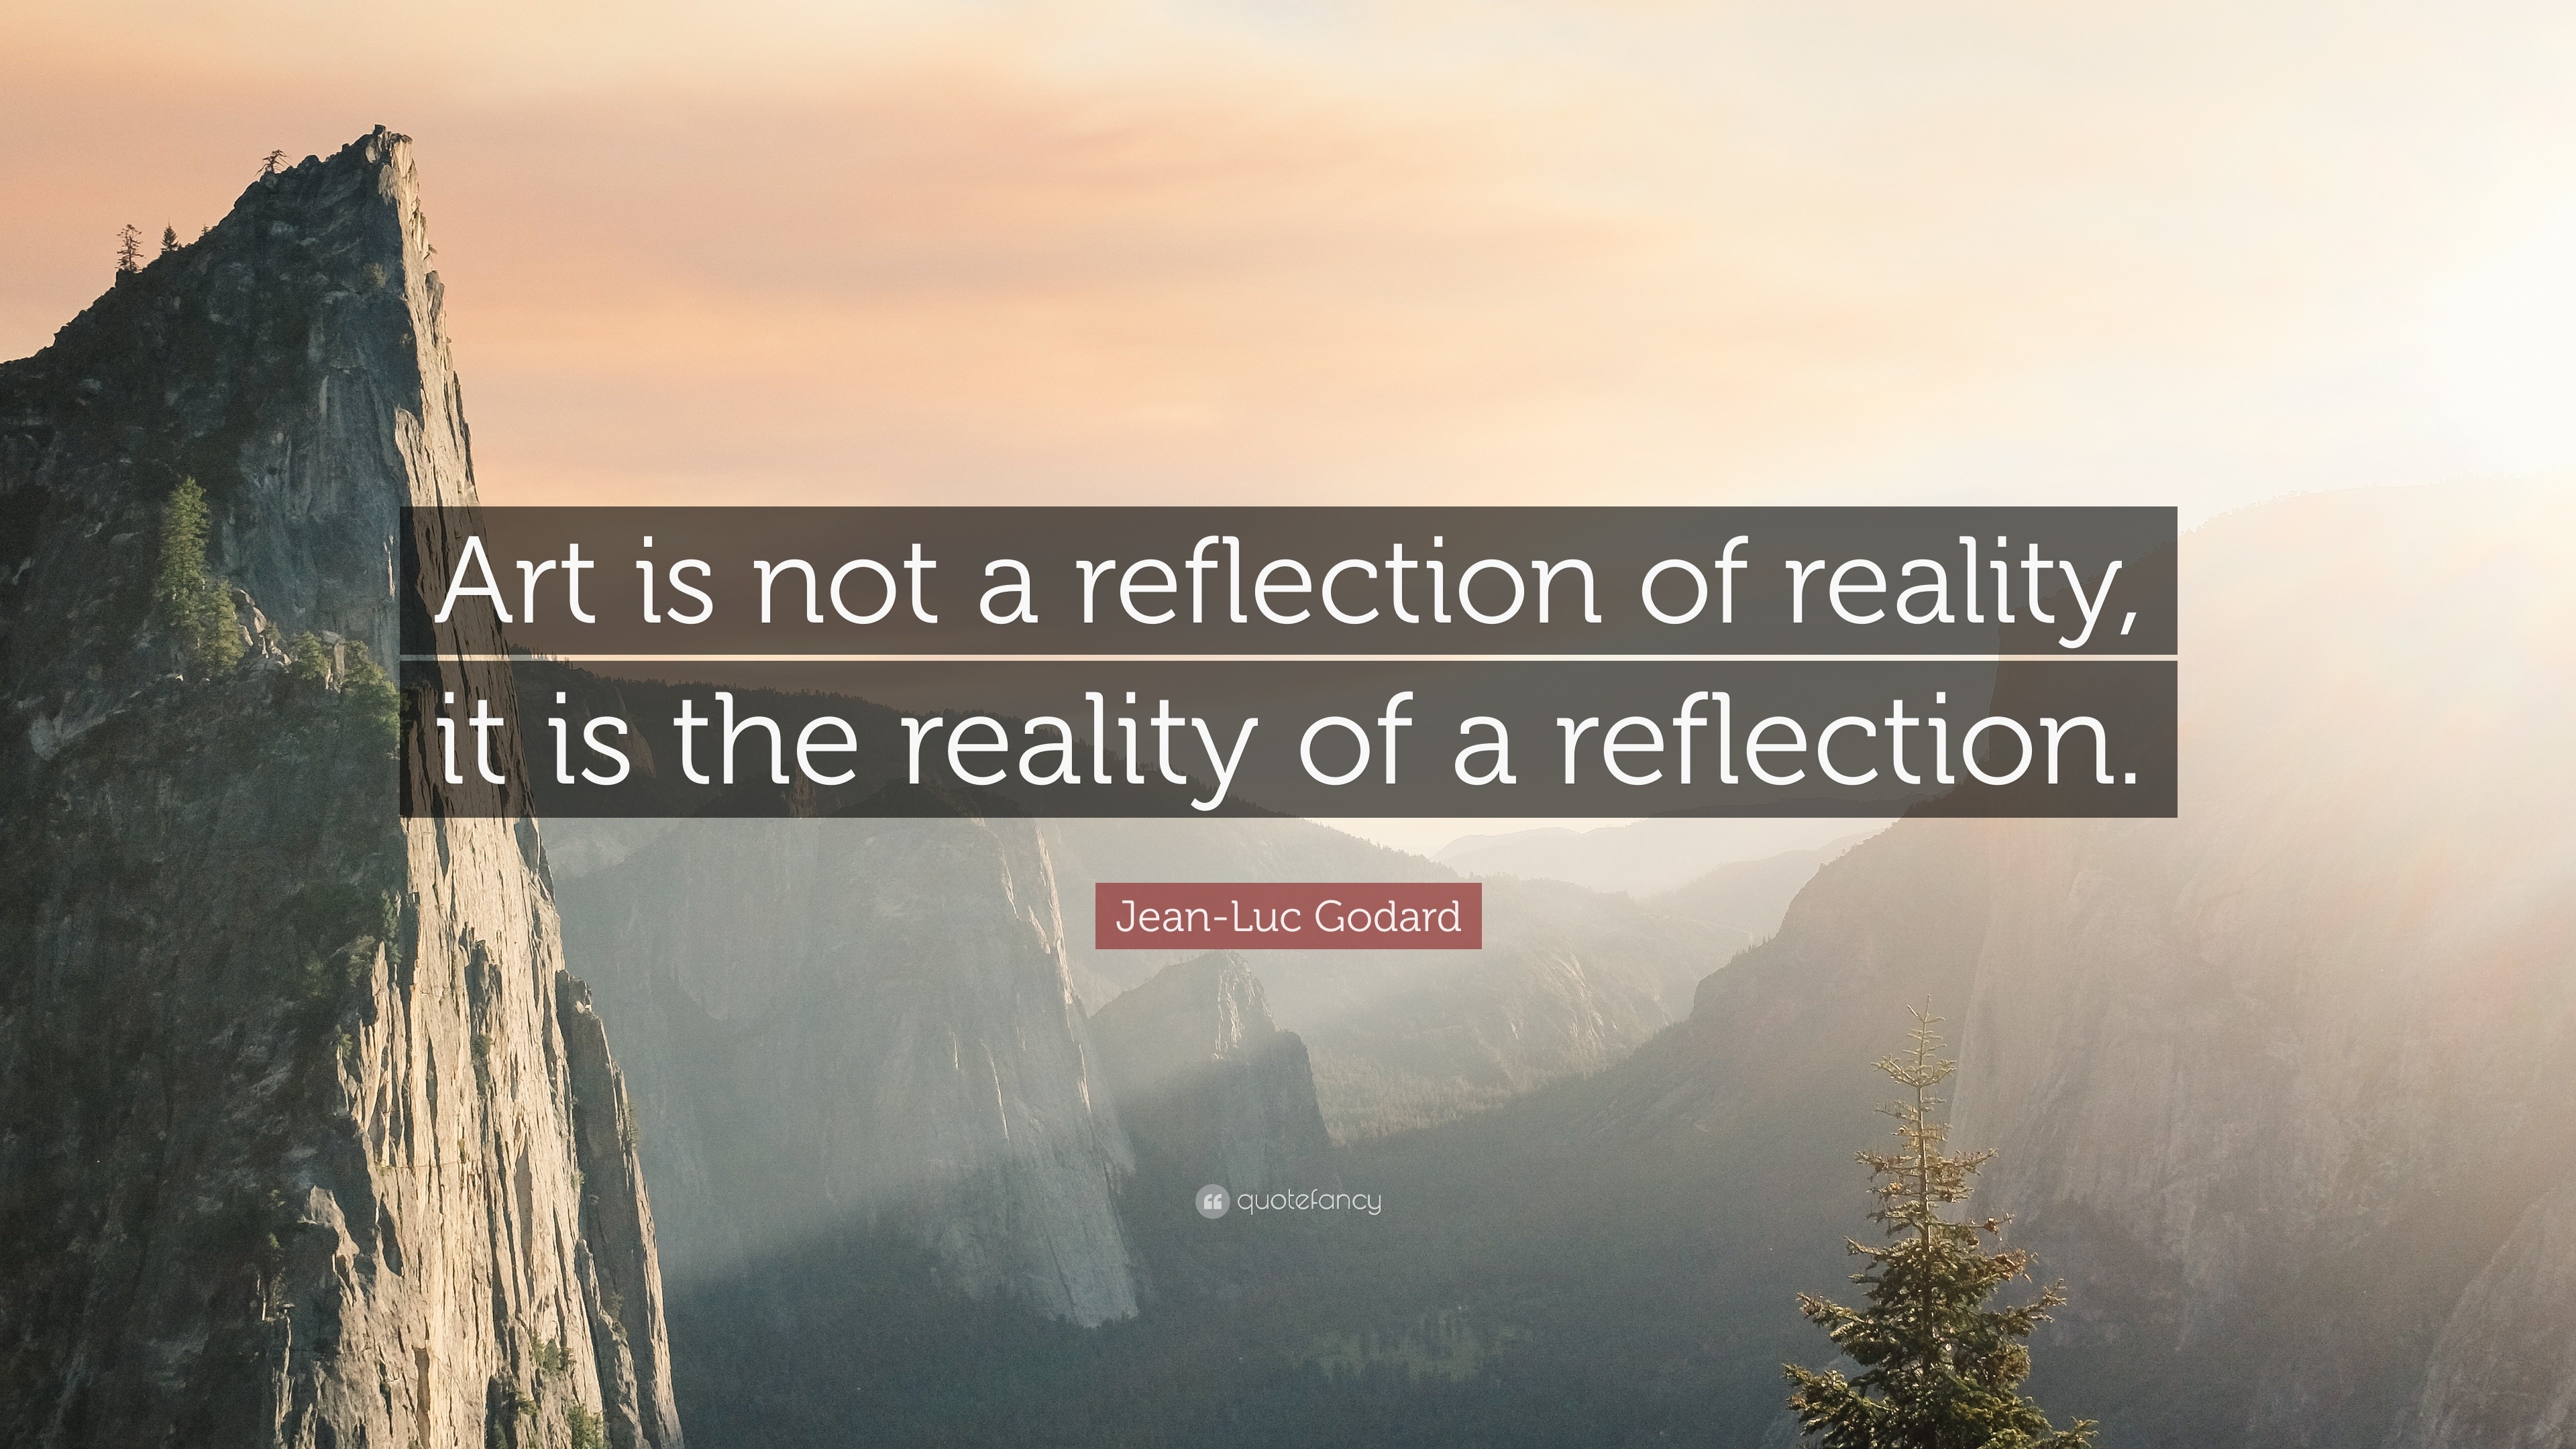 JeanLuc Godard Quote “Art is not a reflection of reality